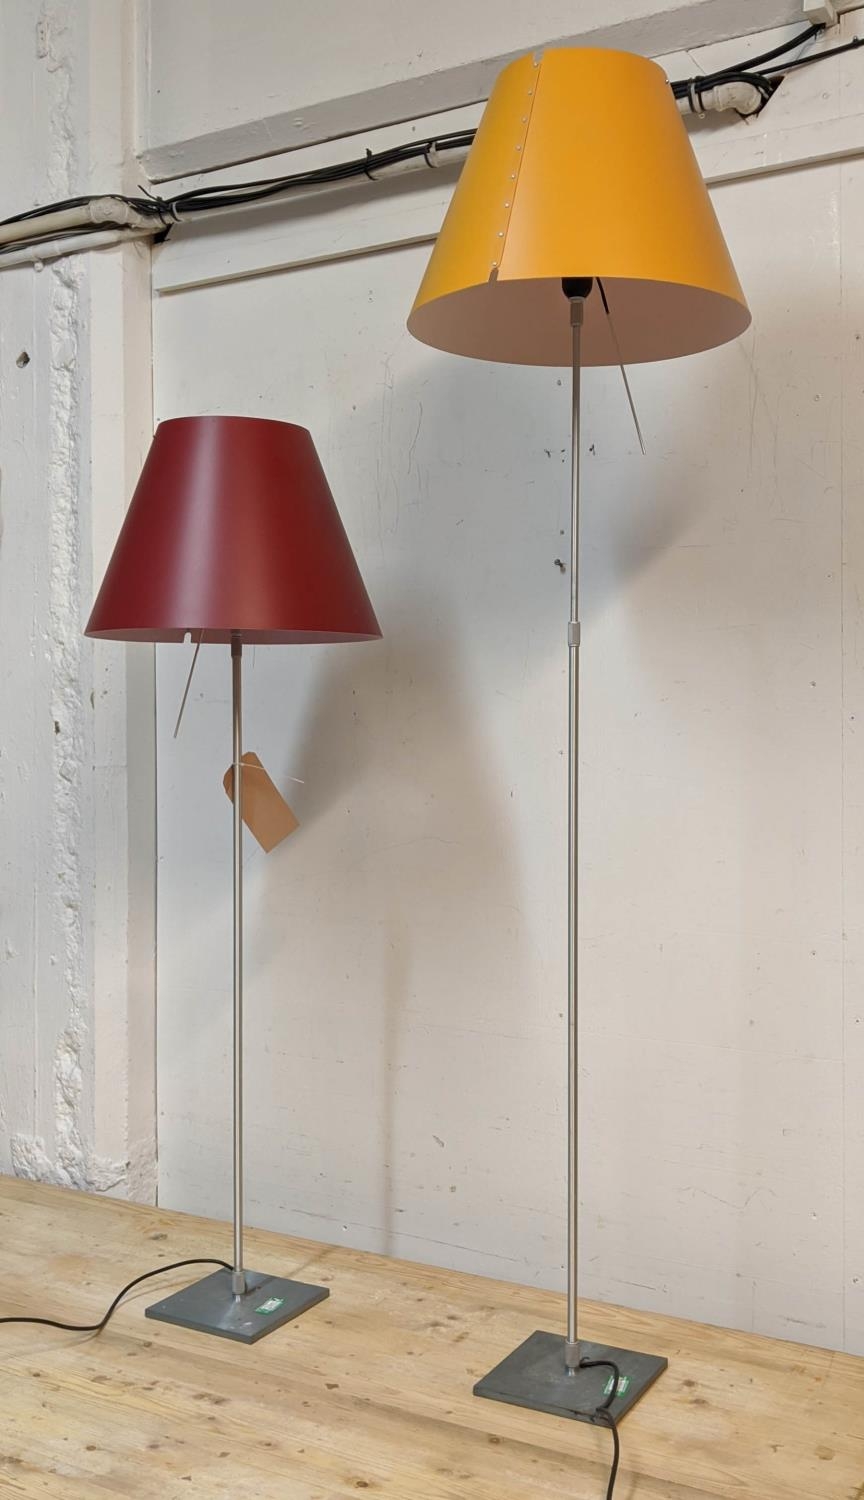 LUCEPLAN COSTANZA FLOOR LAMPS, a set of two, by Paolo Rizzatto, different colour shades, height